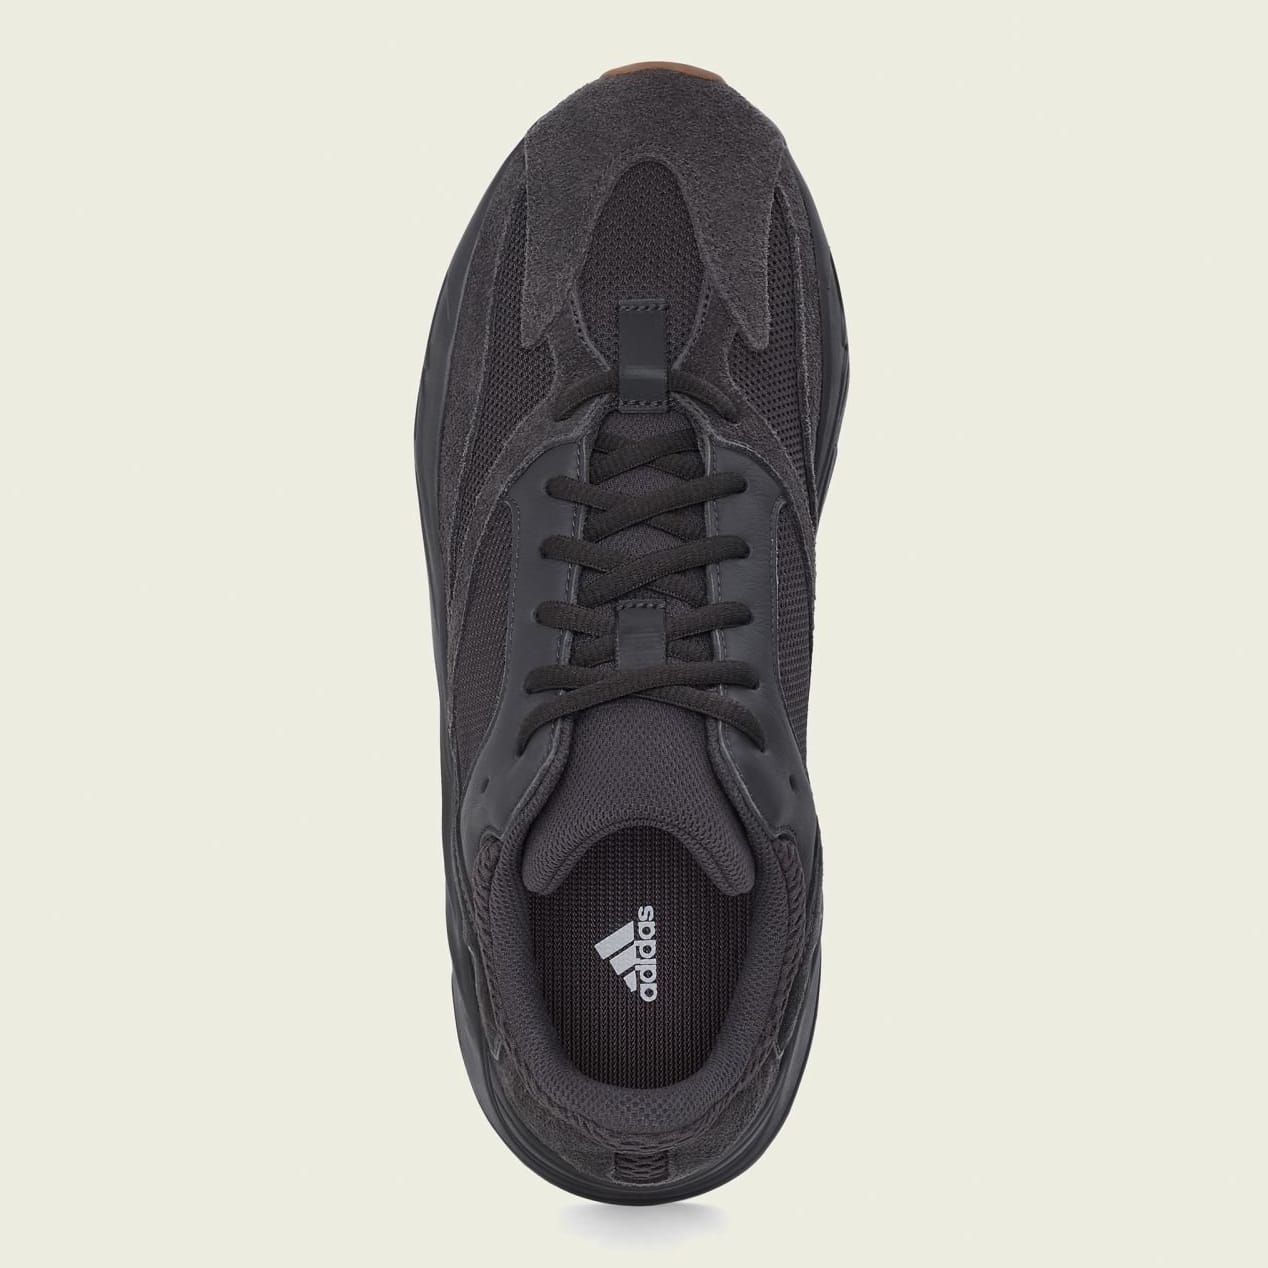 Adidas Yeezy Boost 700 Utility Black Release Date Top